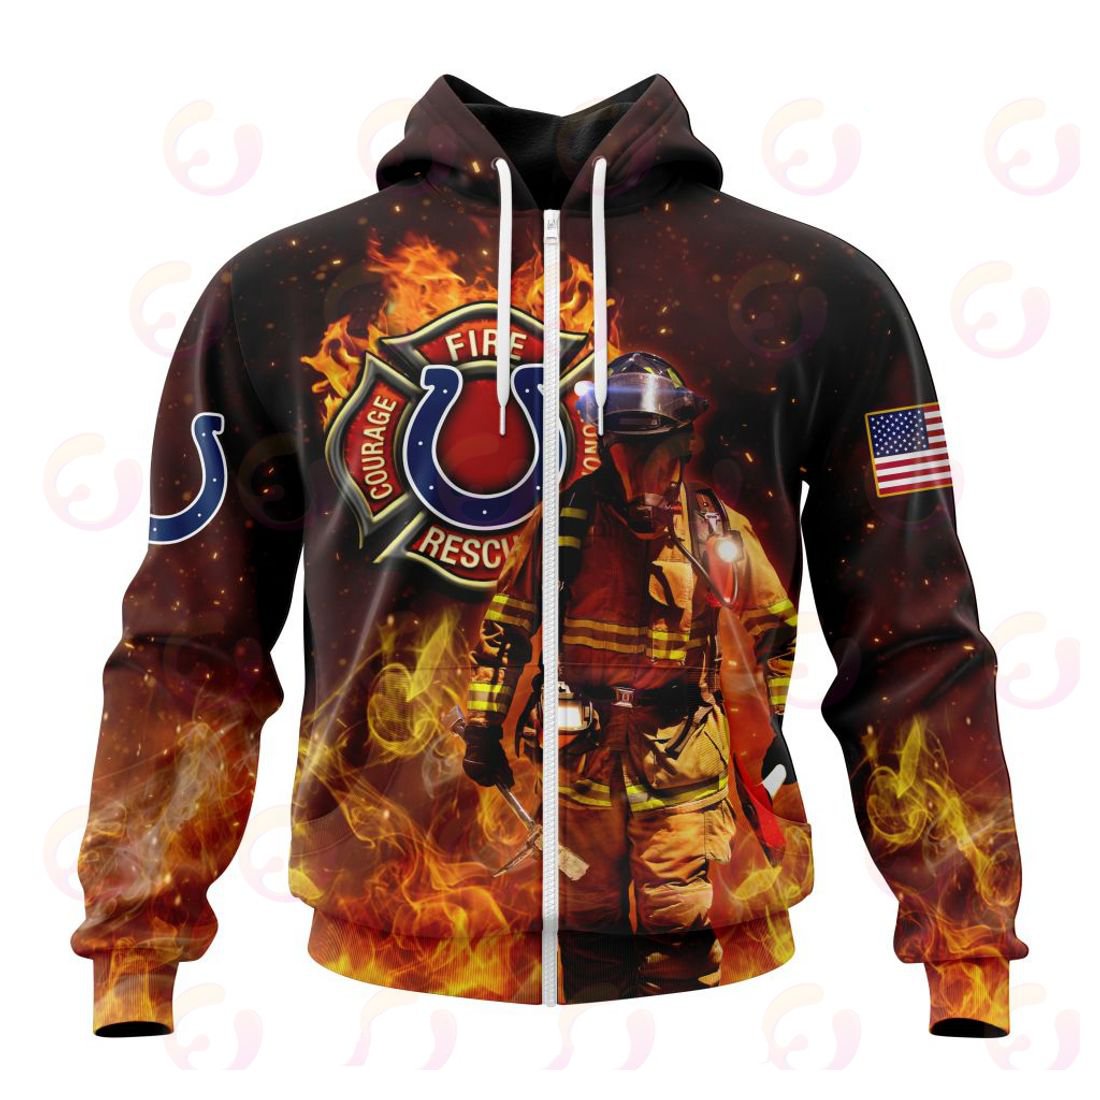 INDIANAPOLIS COLTS HONOR FIREFIGHTERS – FIRST RESPONDERS 3D HOODIE